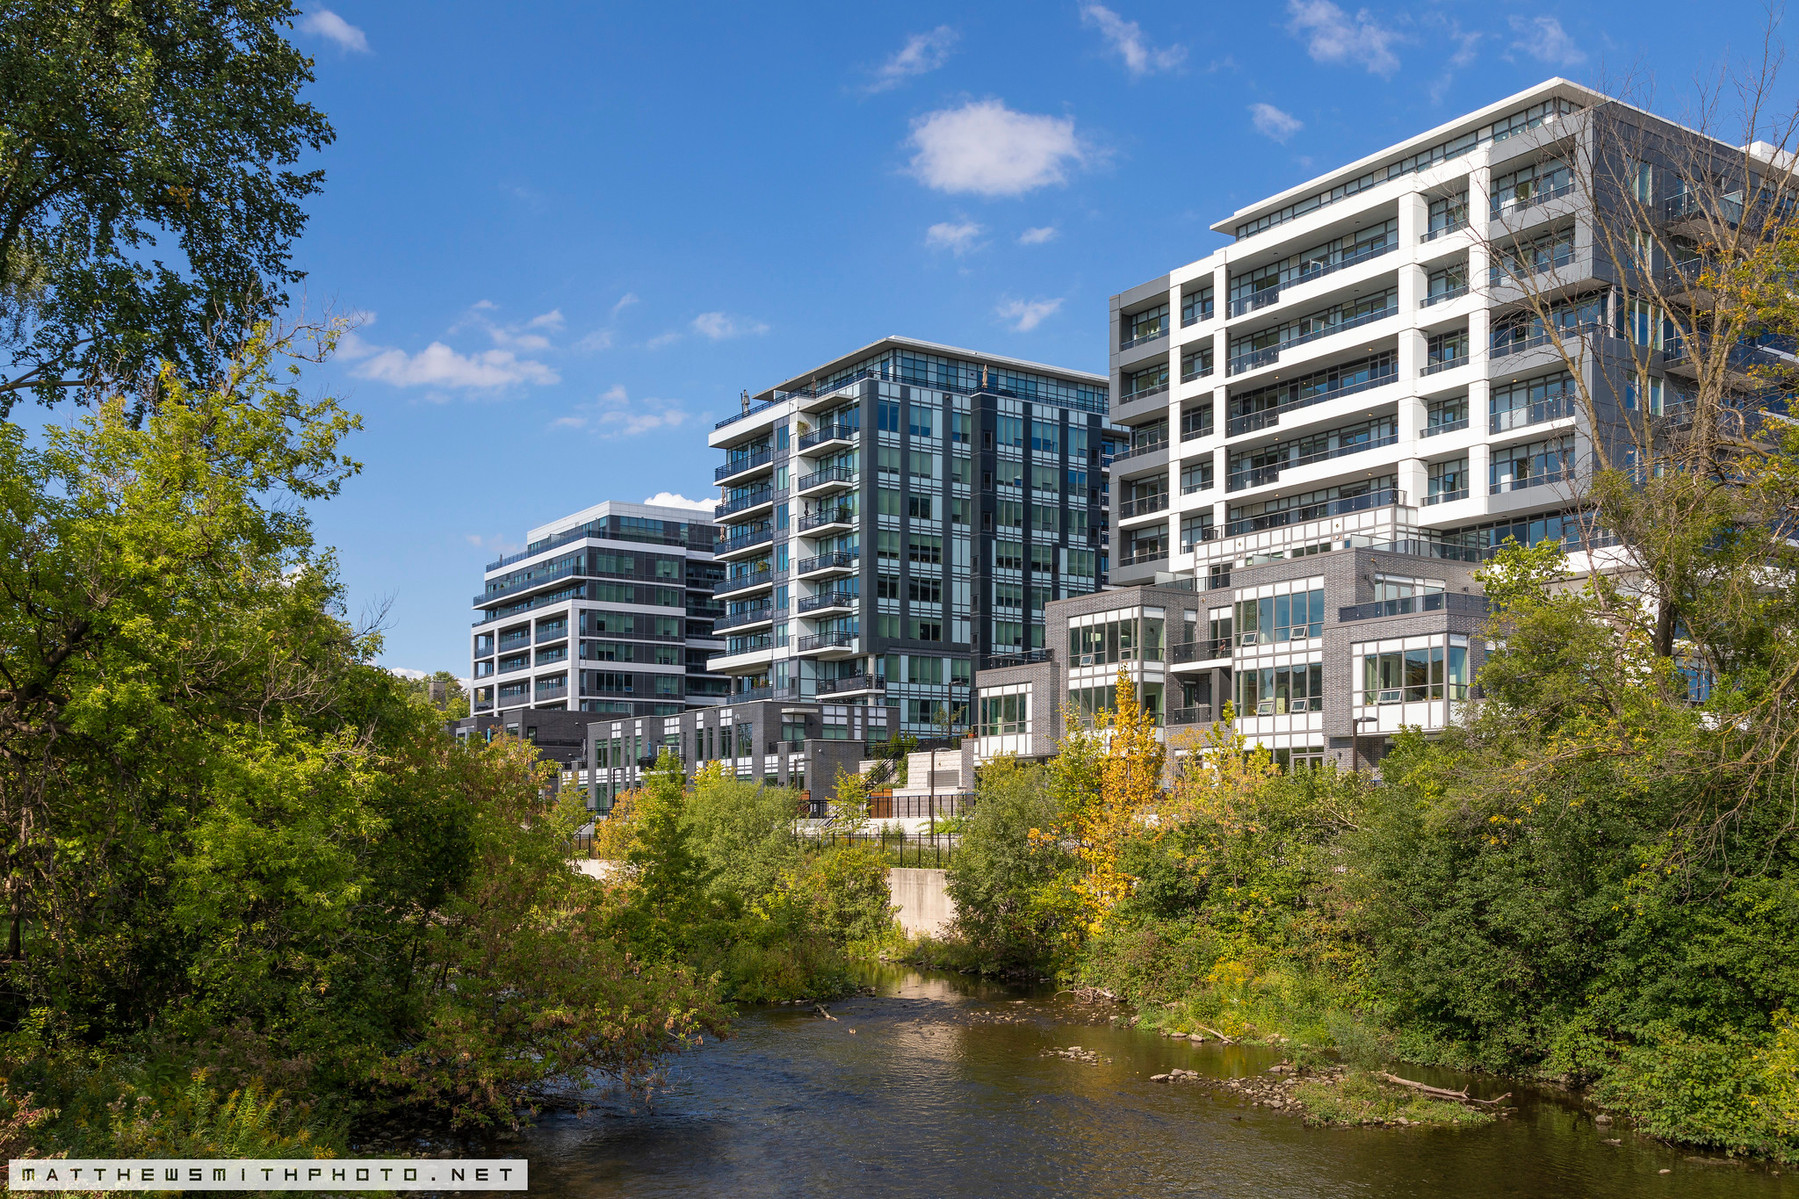 Guelph Metalworks Condos Kirkor Architects, architecture photography